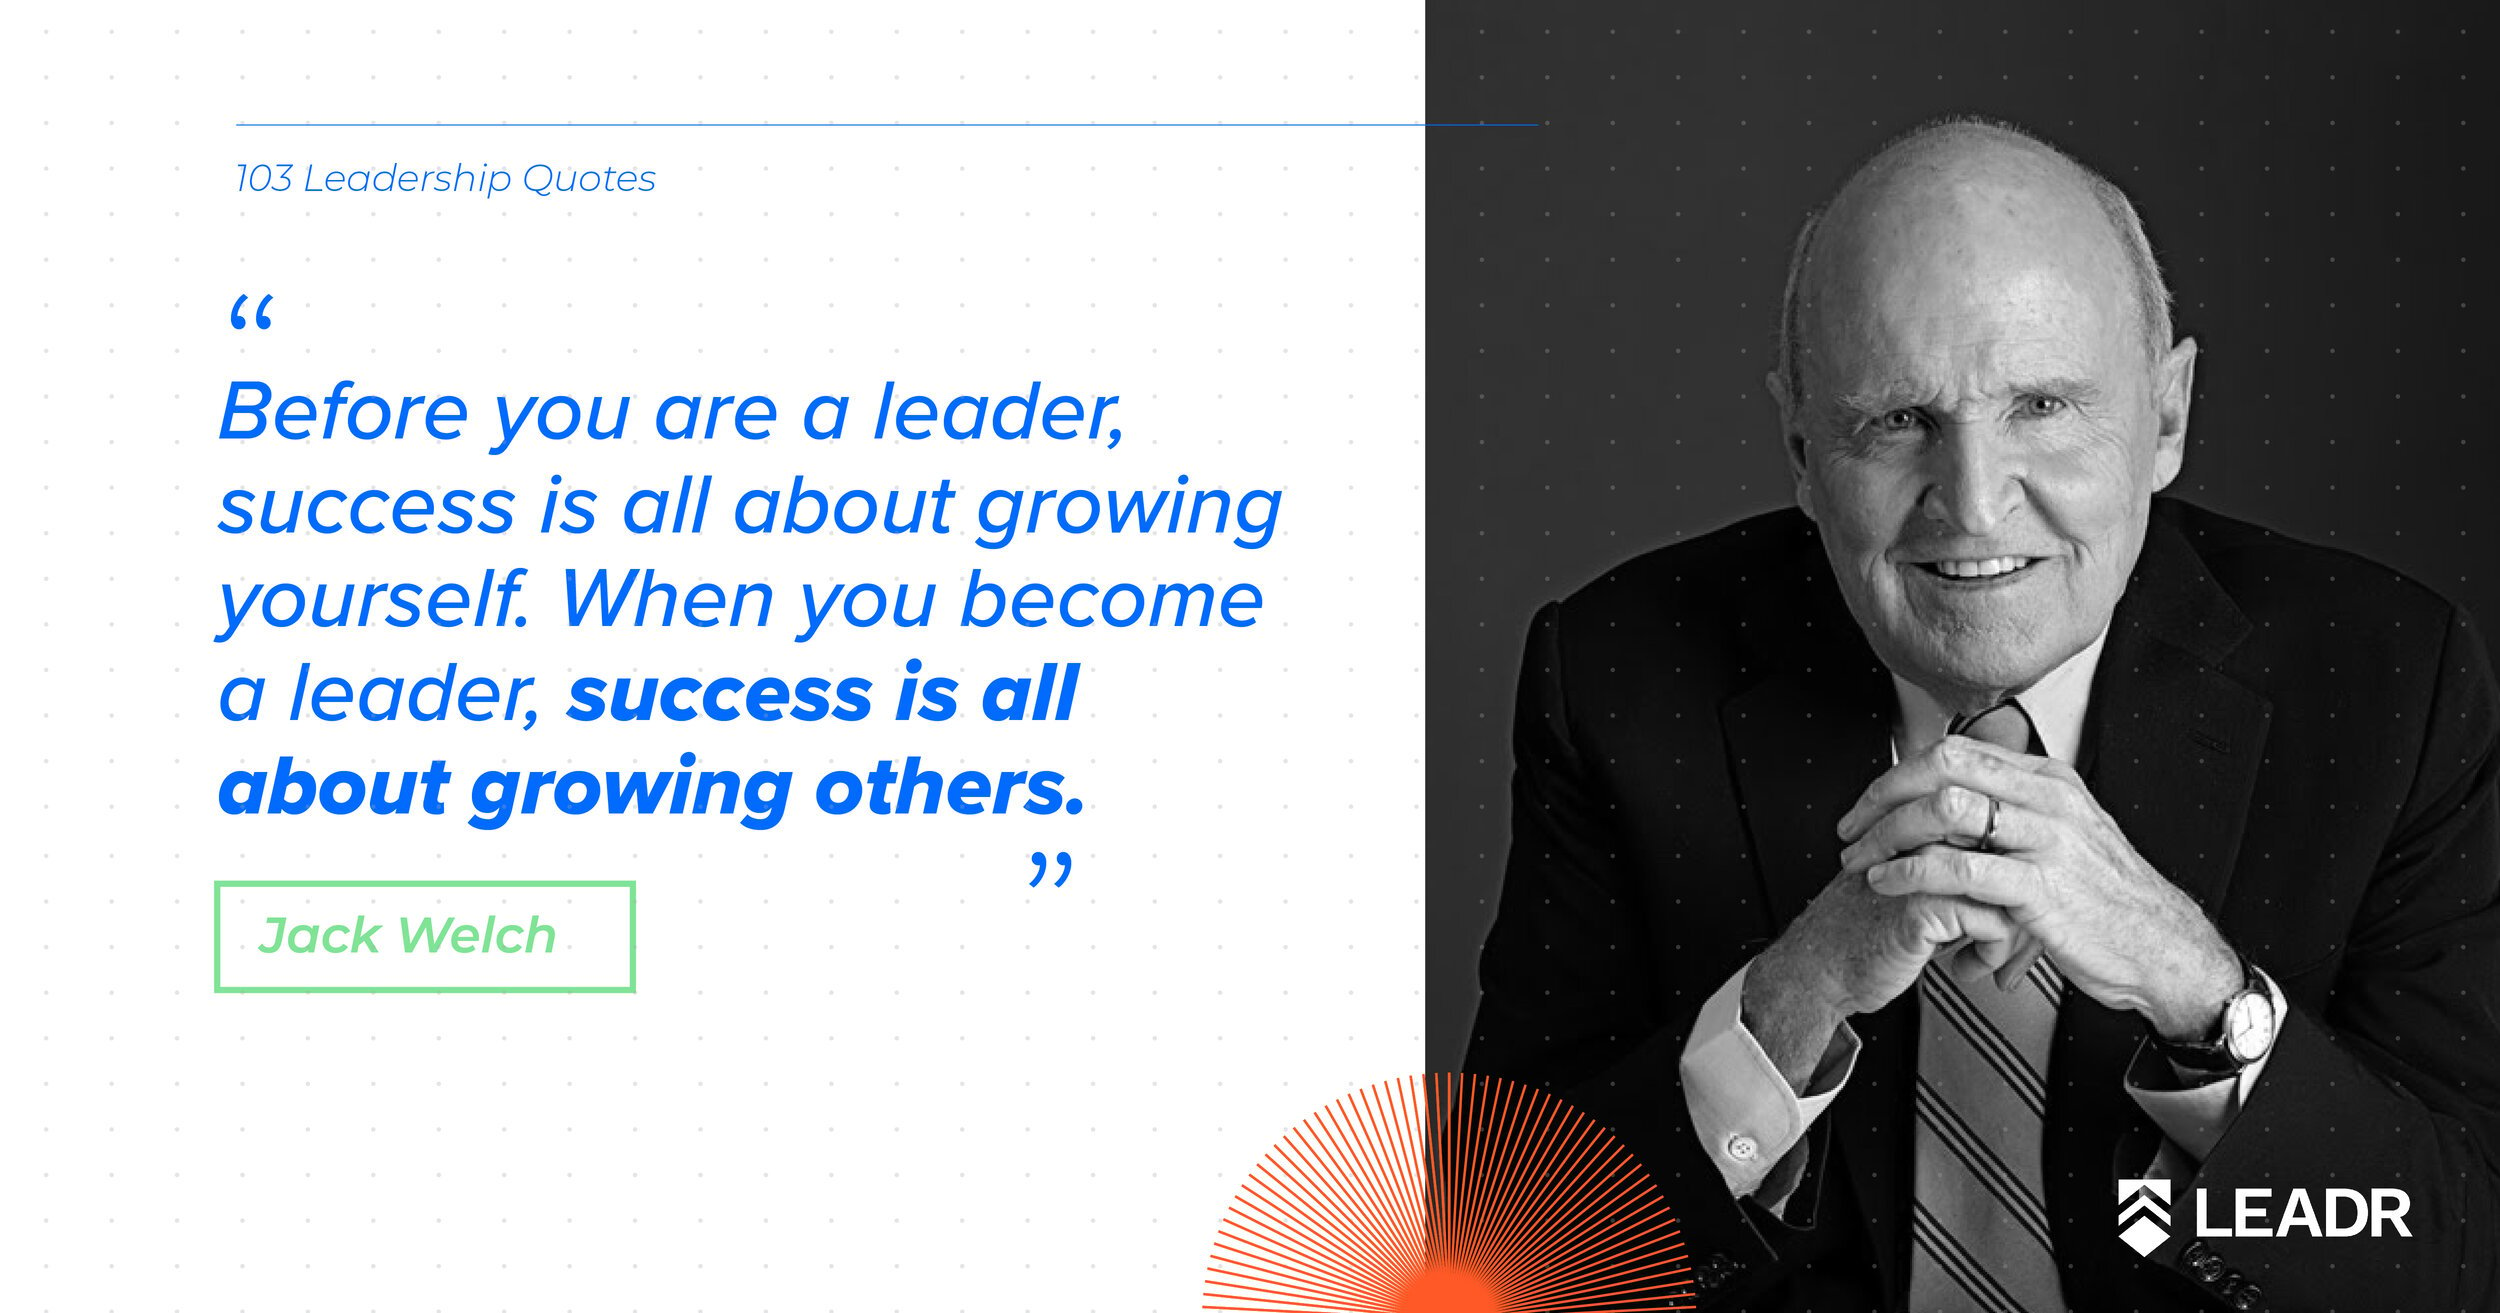 Royalty free downloadable leadership quotes - Jack Welch